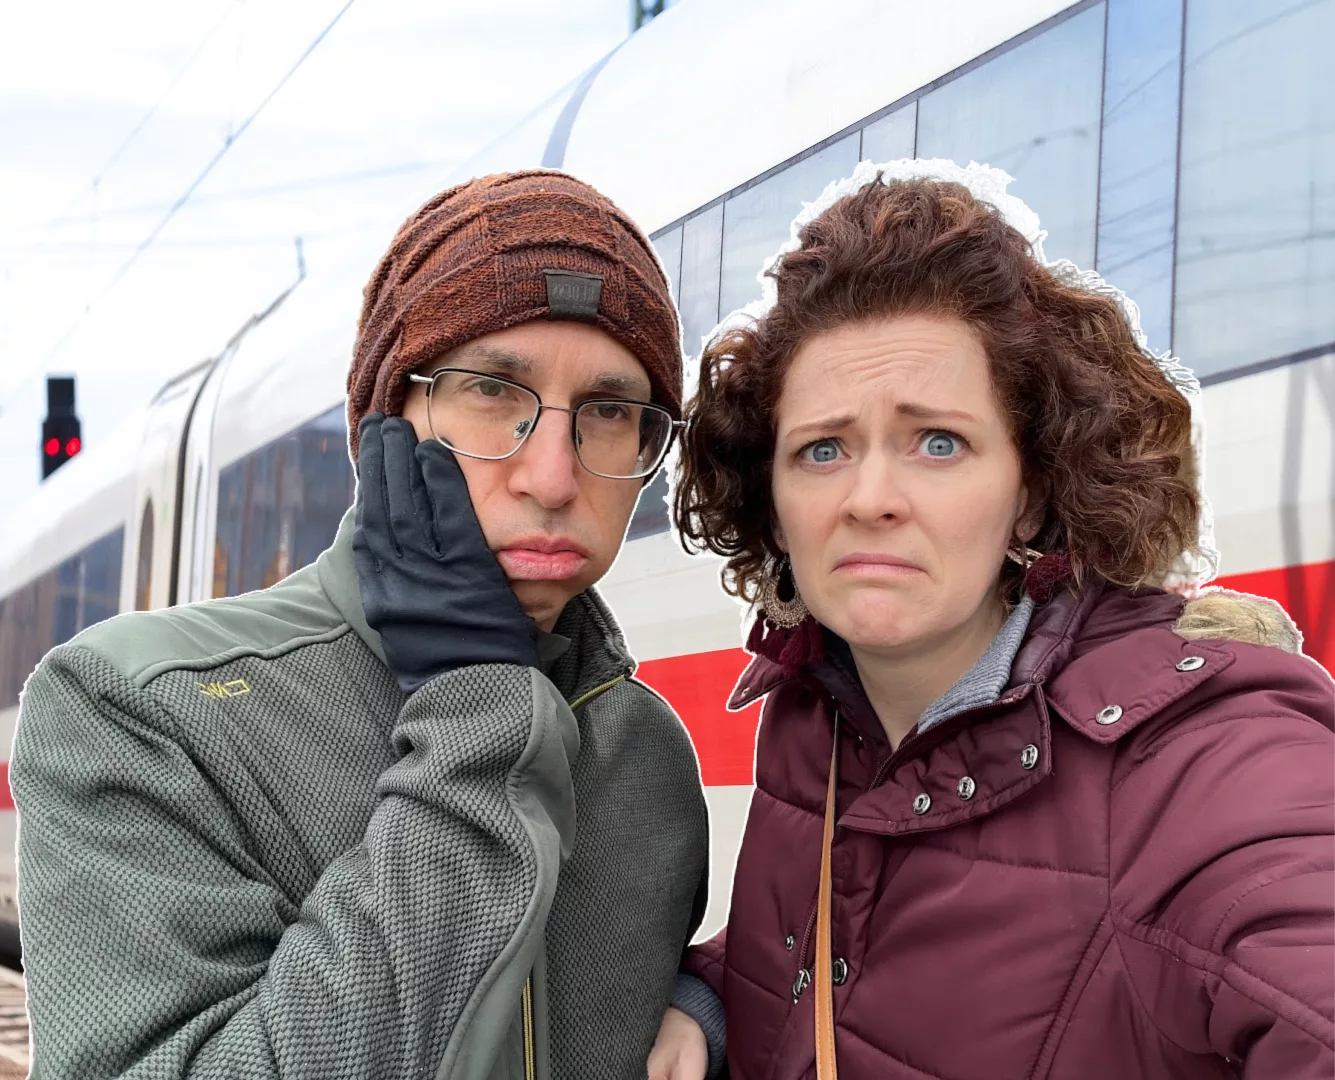 Our First Long-Distance ICE Train Trip in Germany was Bit Bumpy